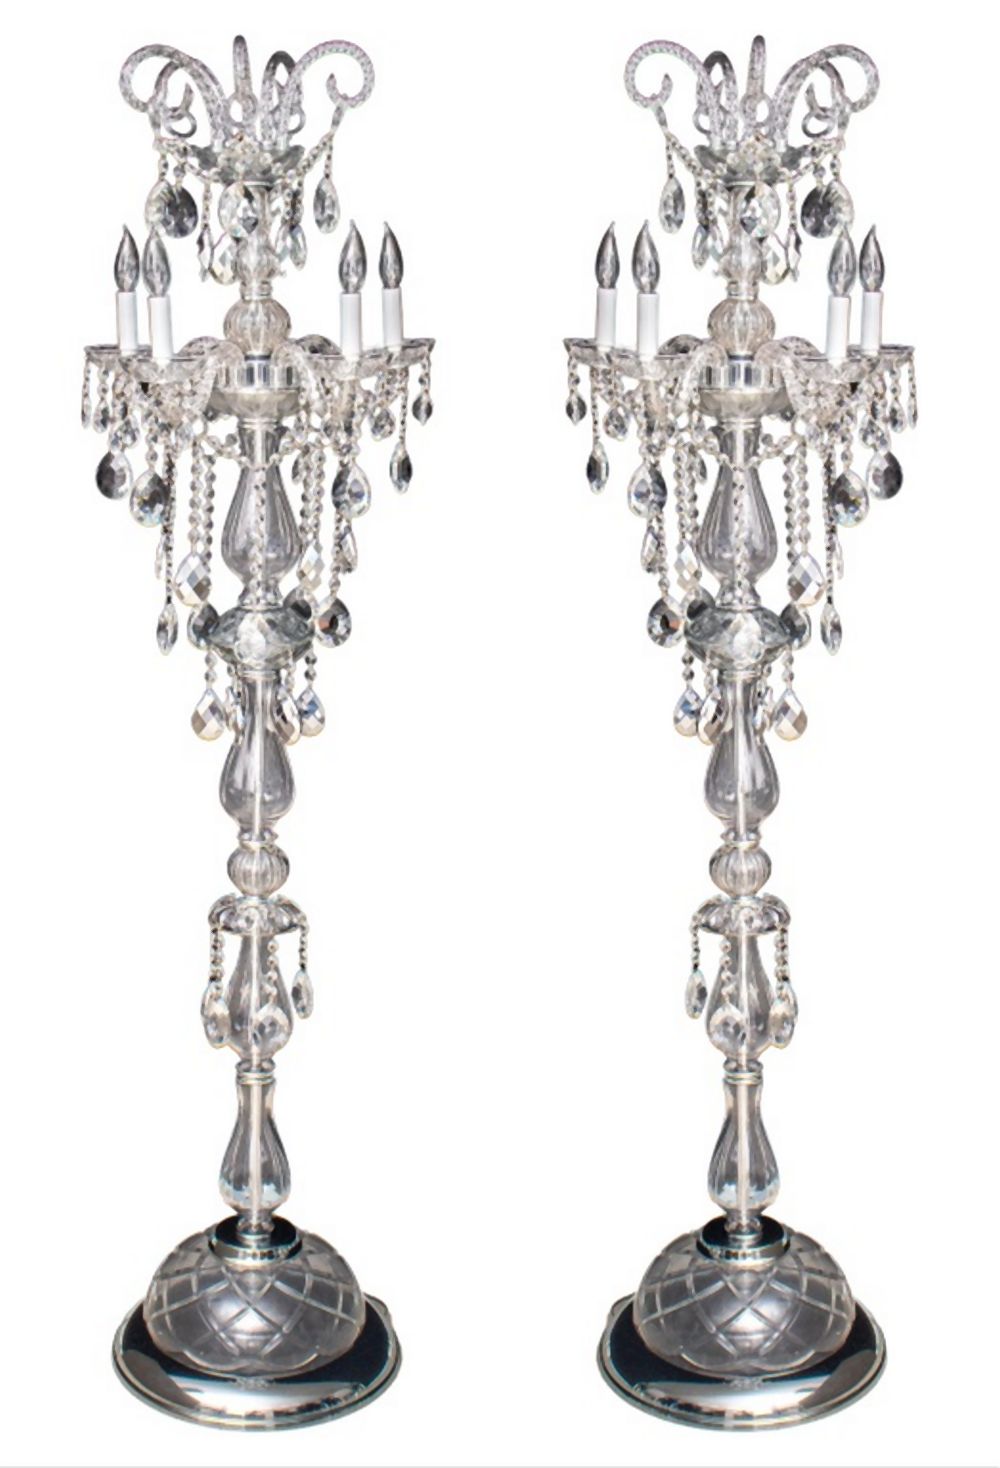 BACCARAT STYLE BAROQUE REVIVAL 2fb83a